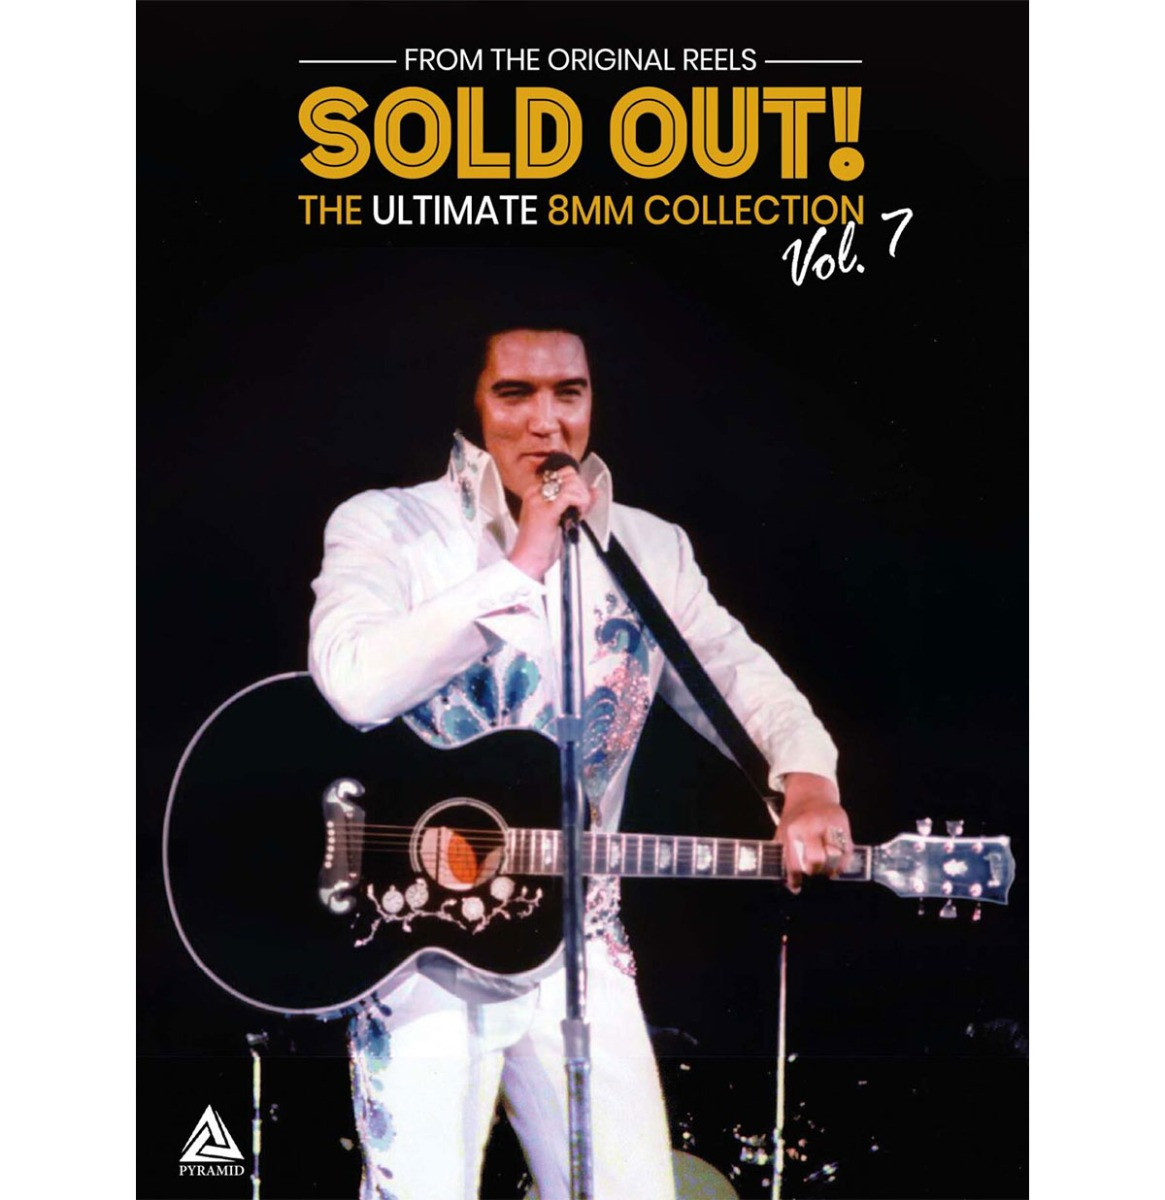 Elvis Presley: Sold Out! The Ultimate 8MM Collection Vol. 7 - 2 DVD Set